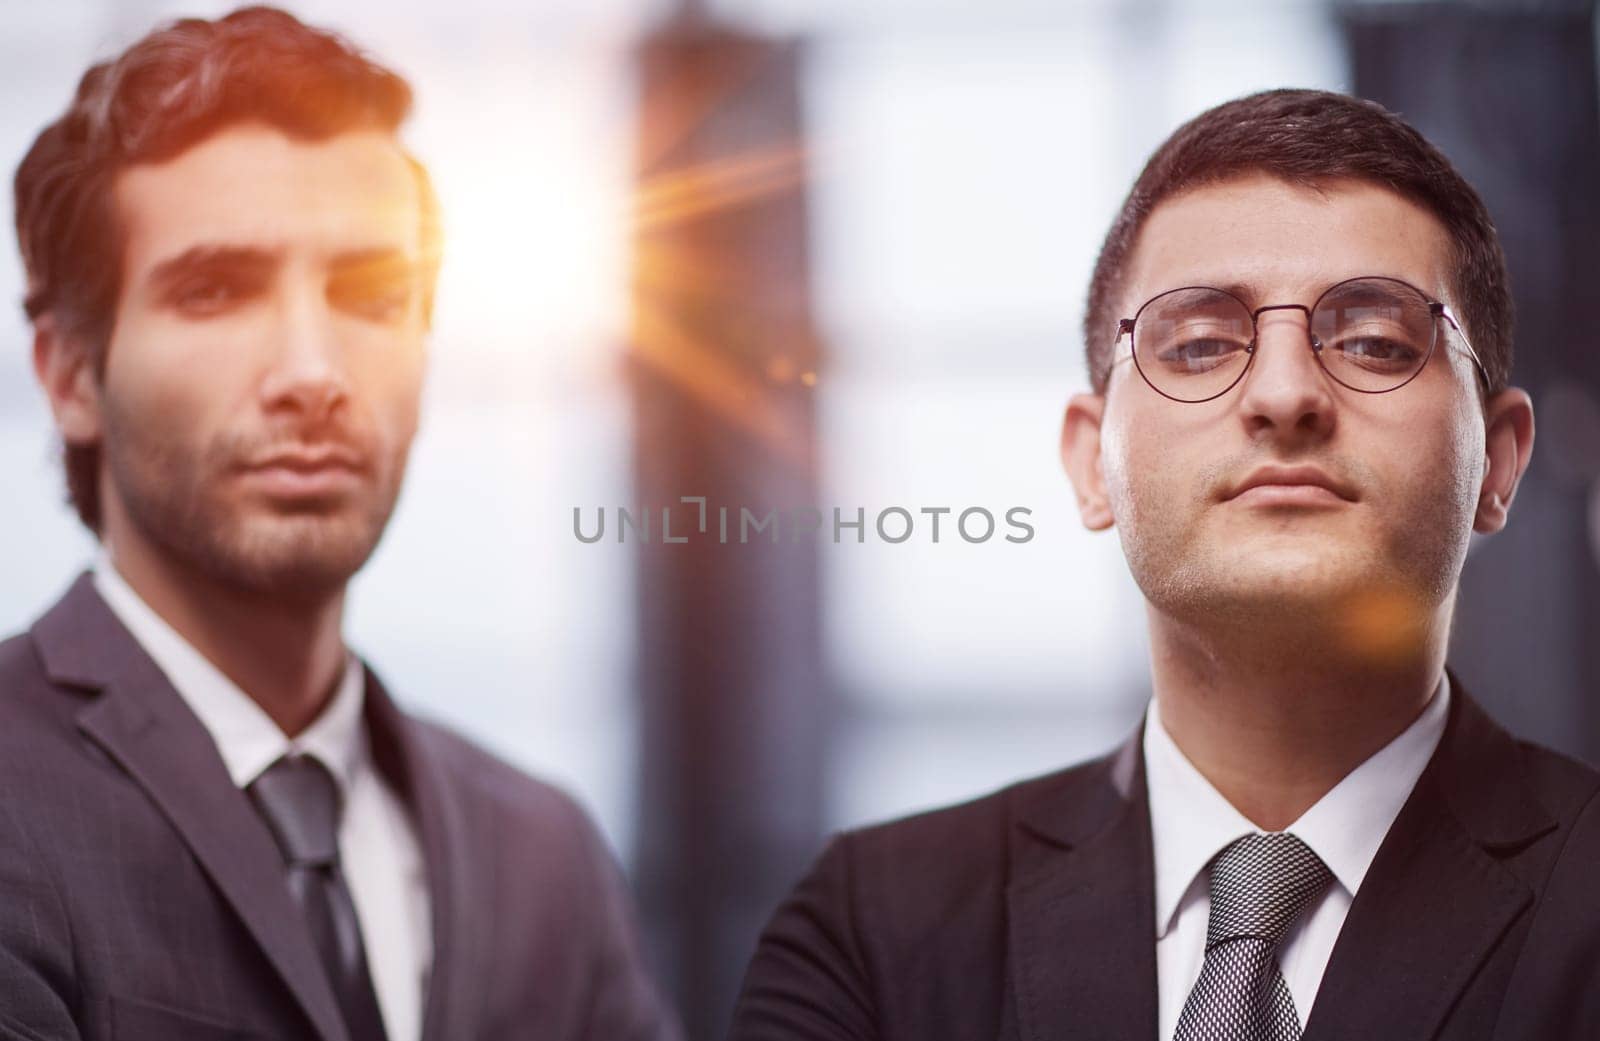 Two men business workers standing with arms crossed gesture at office